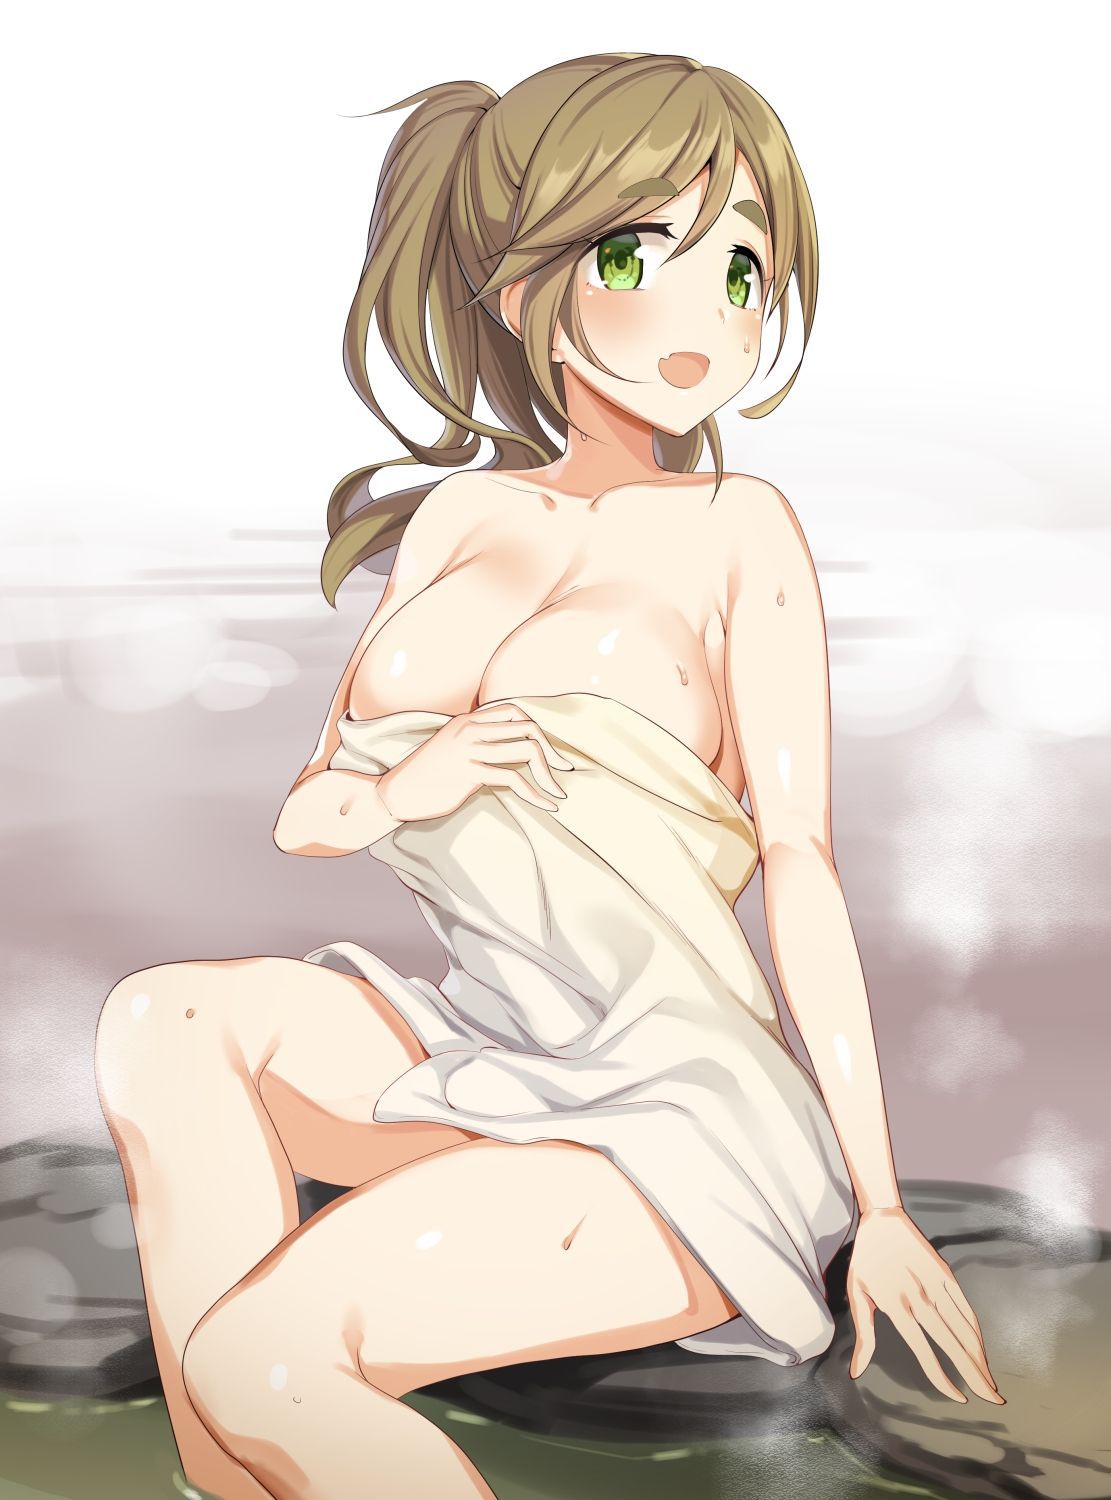 【Erotic Anime Summary】 Dosukebe Beauty and Beautiful Girls Hiding Their Nudity with a Single Towel 【Secondary Erotic】 7